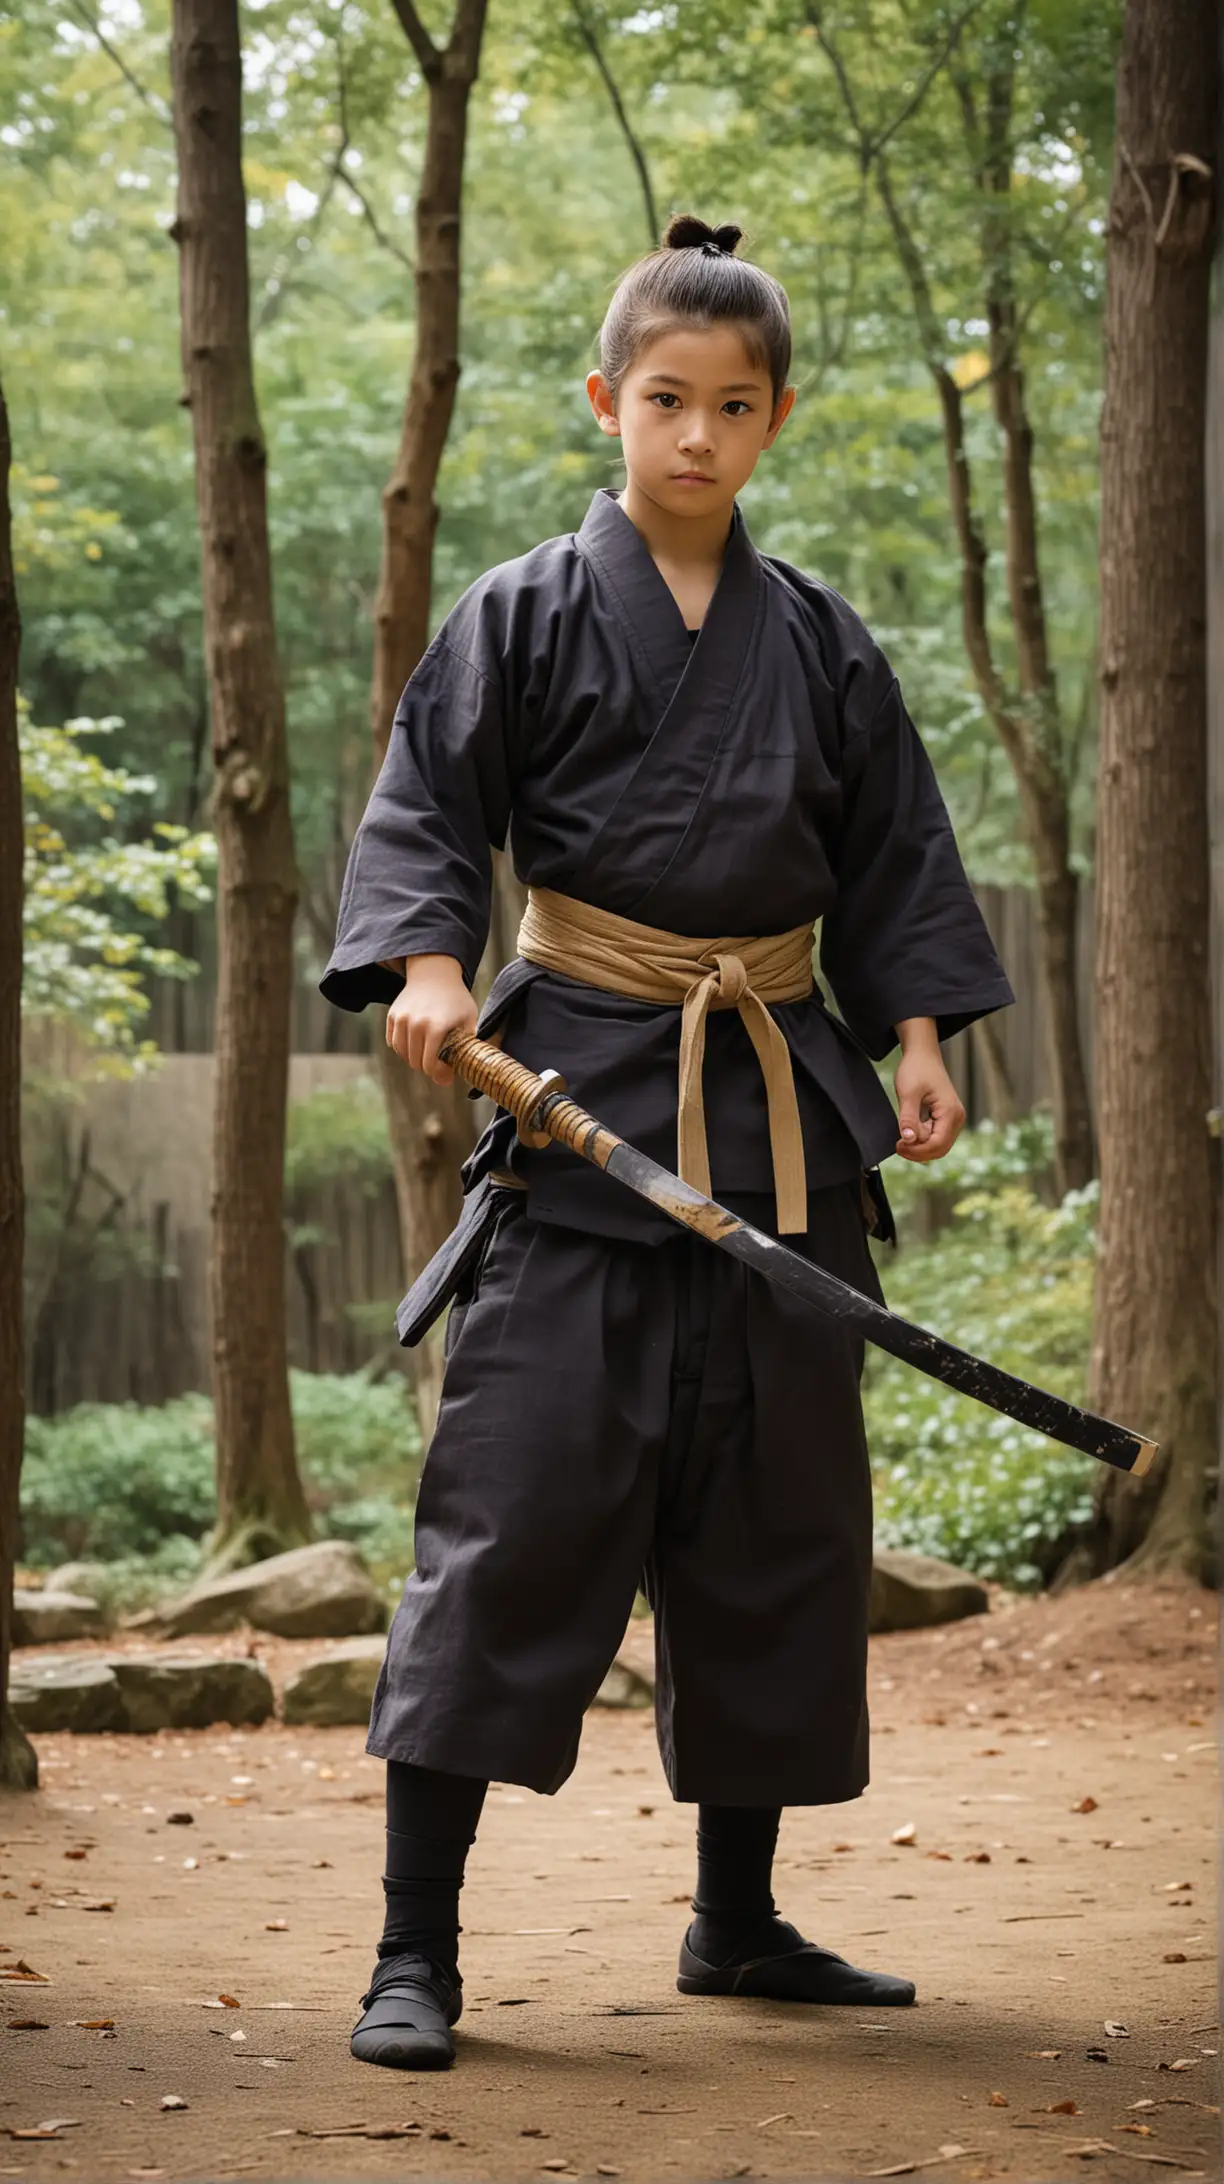 Young Samurai Apprentice Training with Wooden Sword